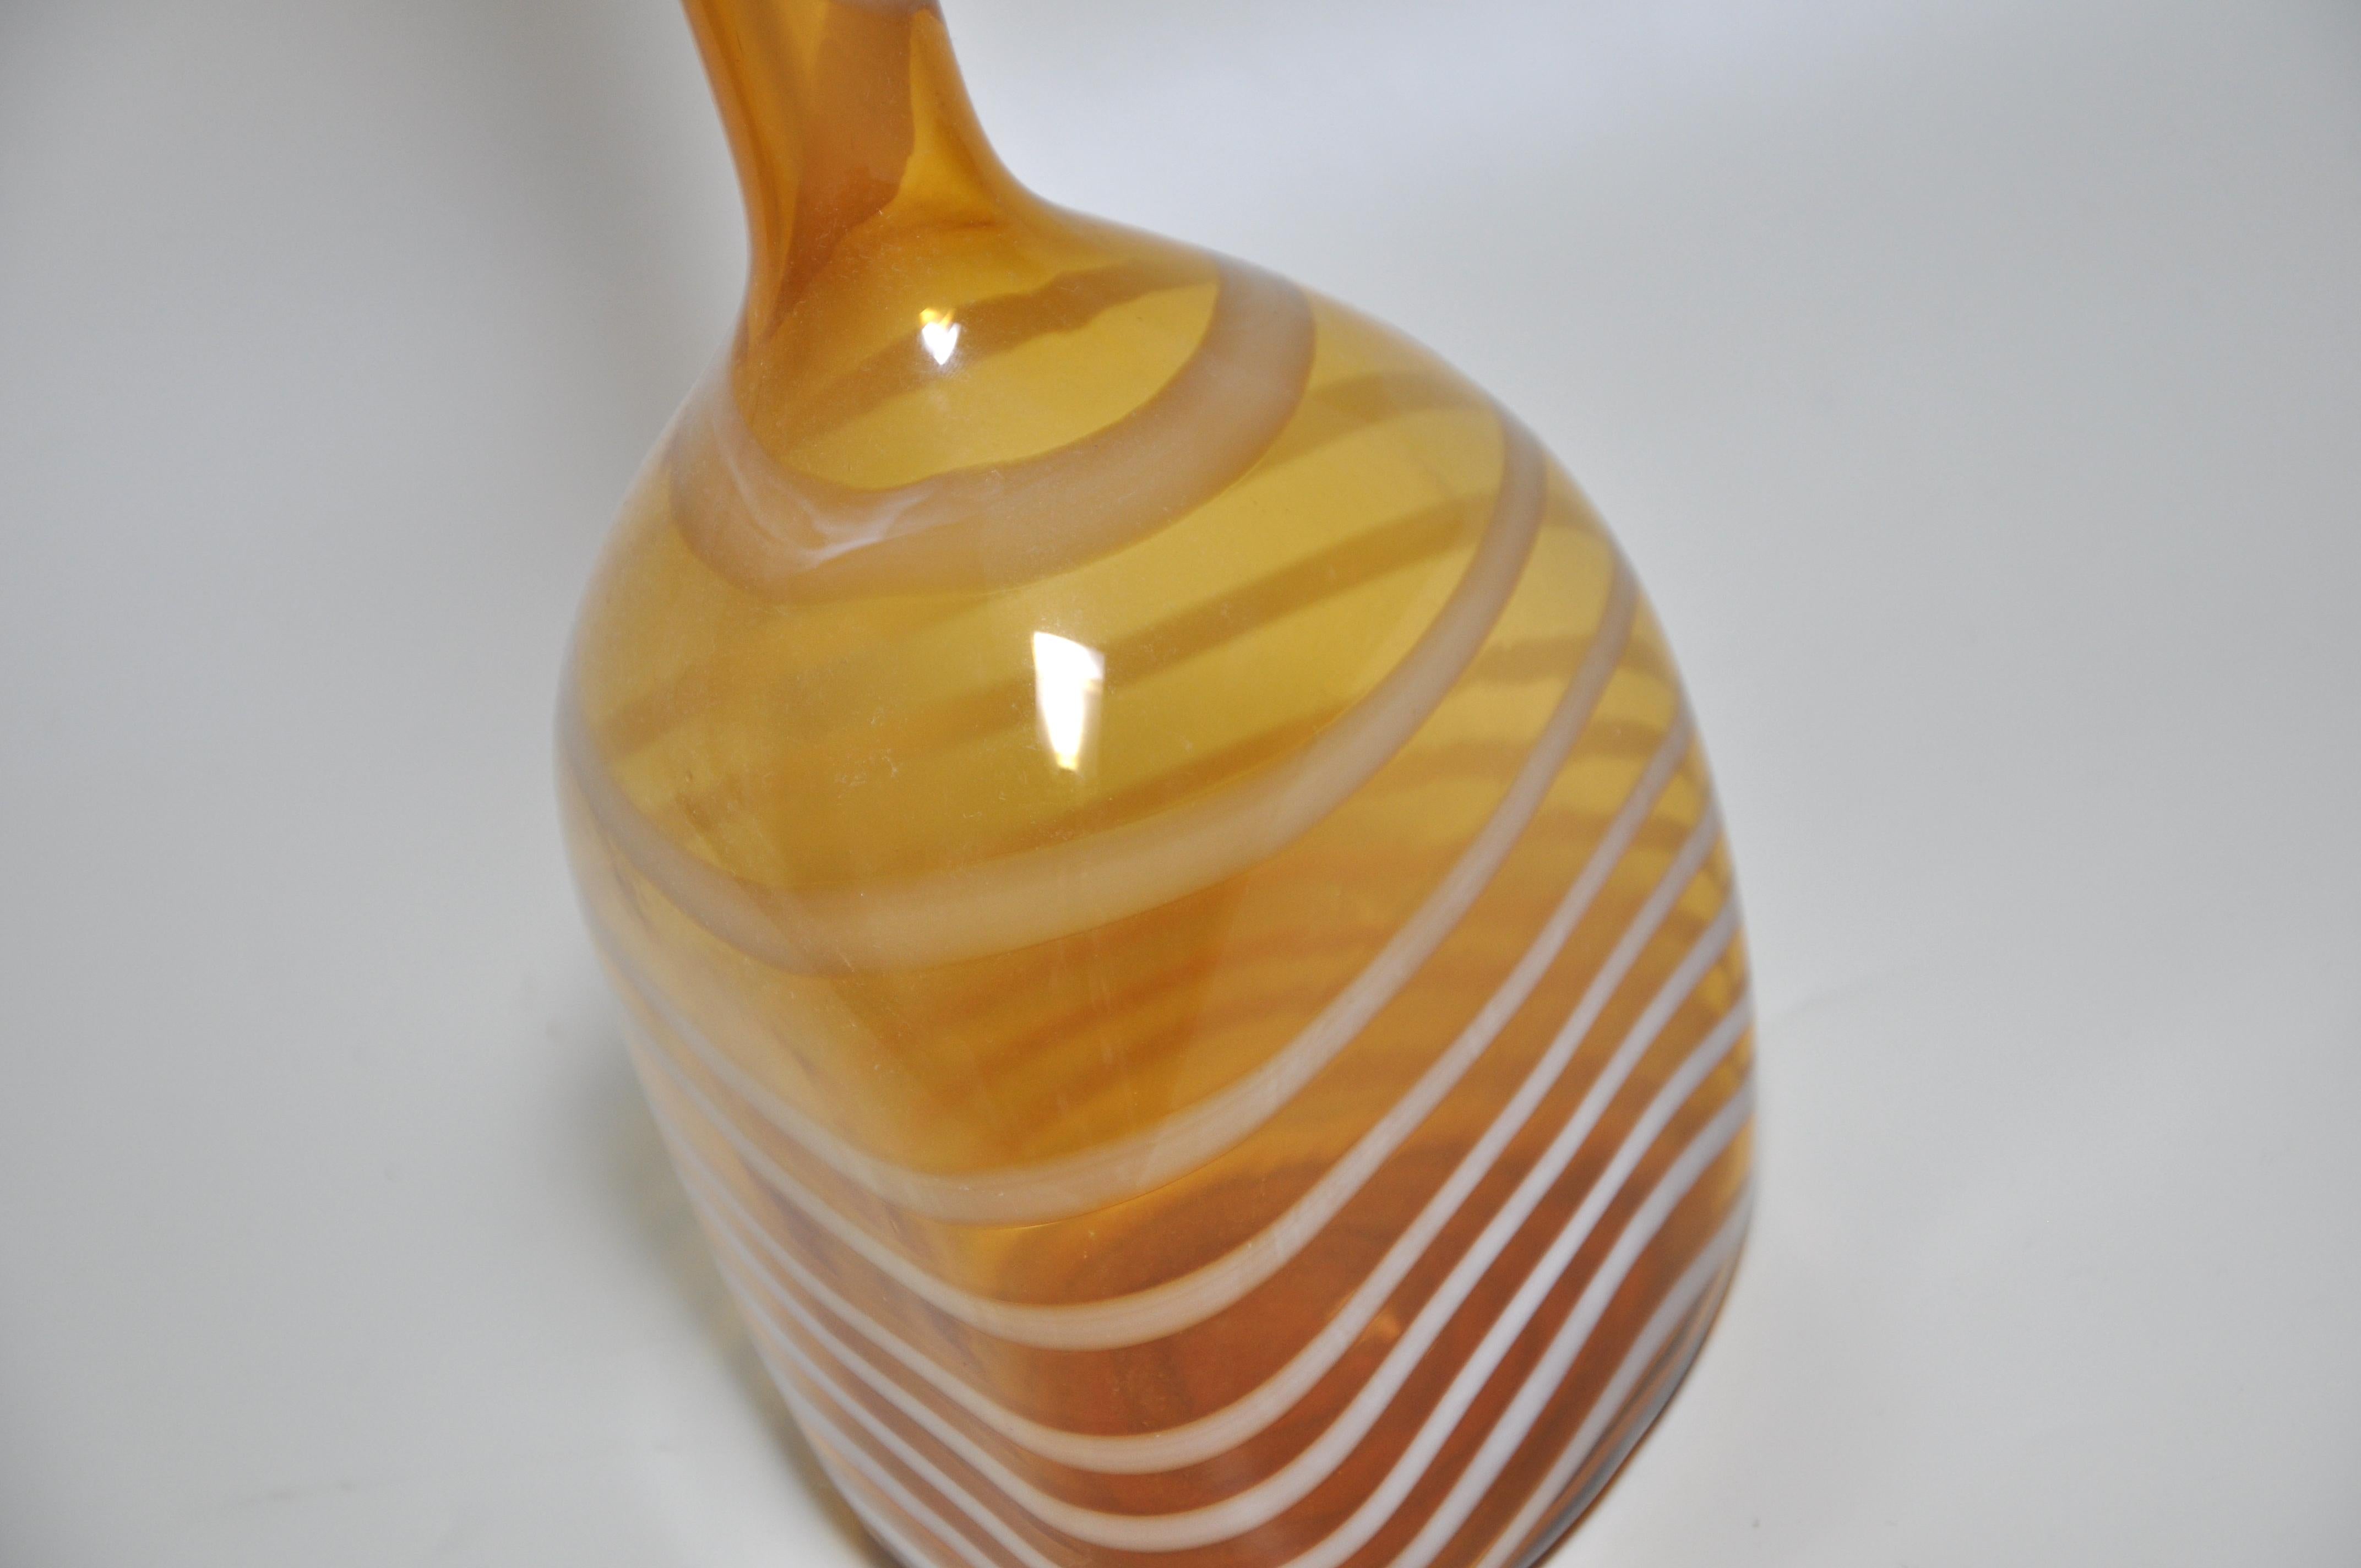 Title:
Hand Blown Art Glass Mustard Large Yellow Ochre White Vase Pot Bottle


Description:

Very striking an unusual unique vintage art piece. A dramatic accent to ones interior.

The base shows that it has been hand blow (as the glass is cut off),